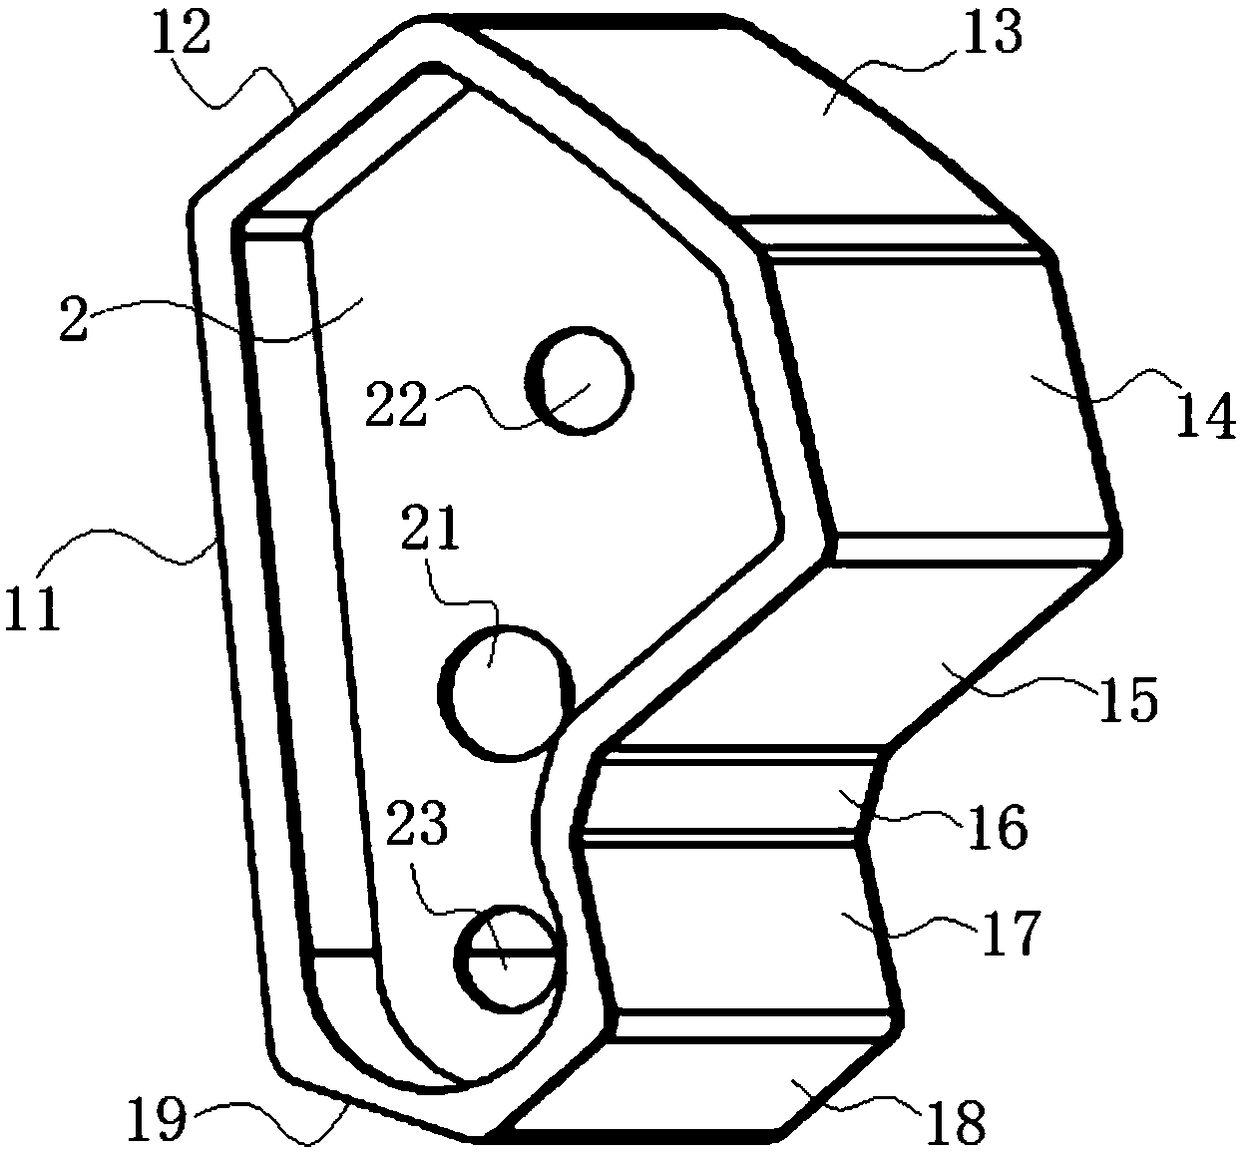 Portable computer hinge shell manufacturing method